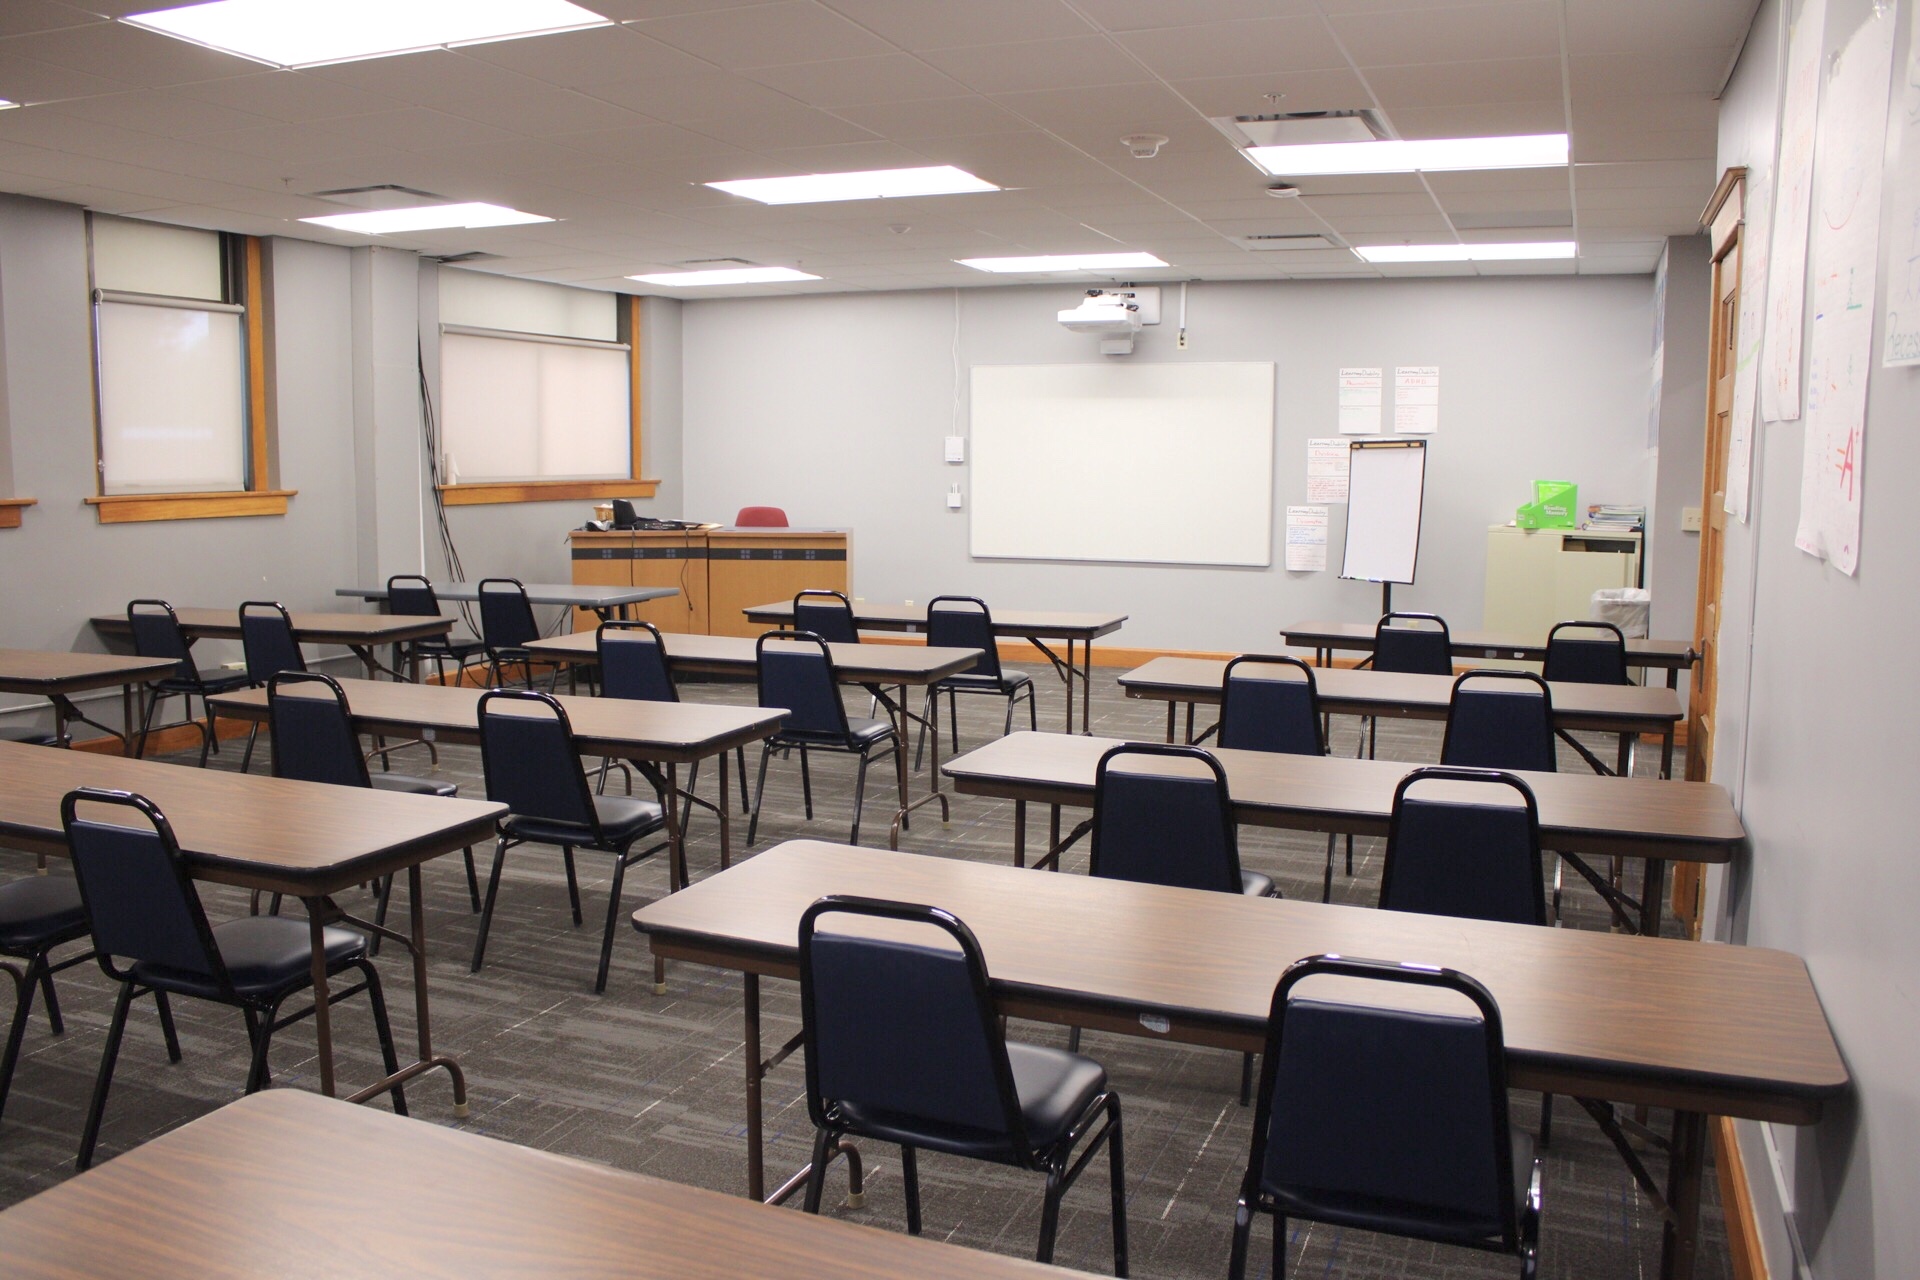 TJ Majors lecture 104 has tables, chairs, a wall mounted projector, whiteboard and a/v cart.